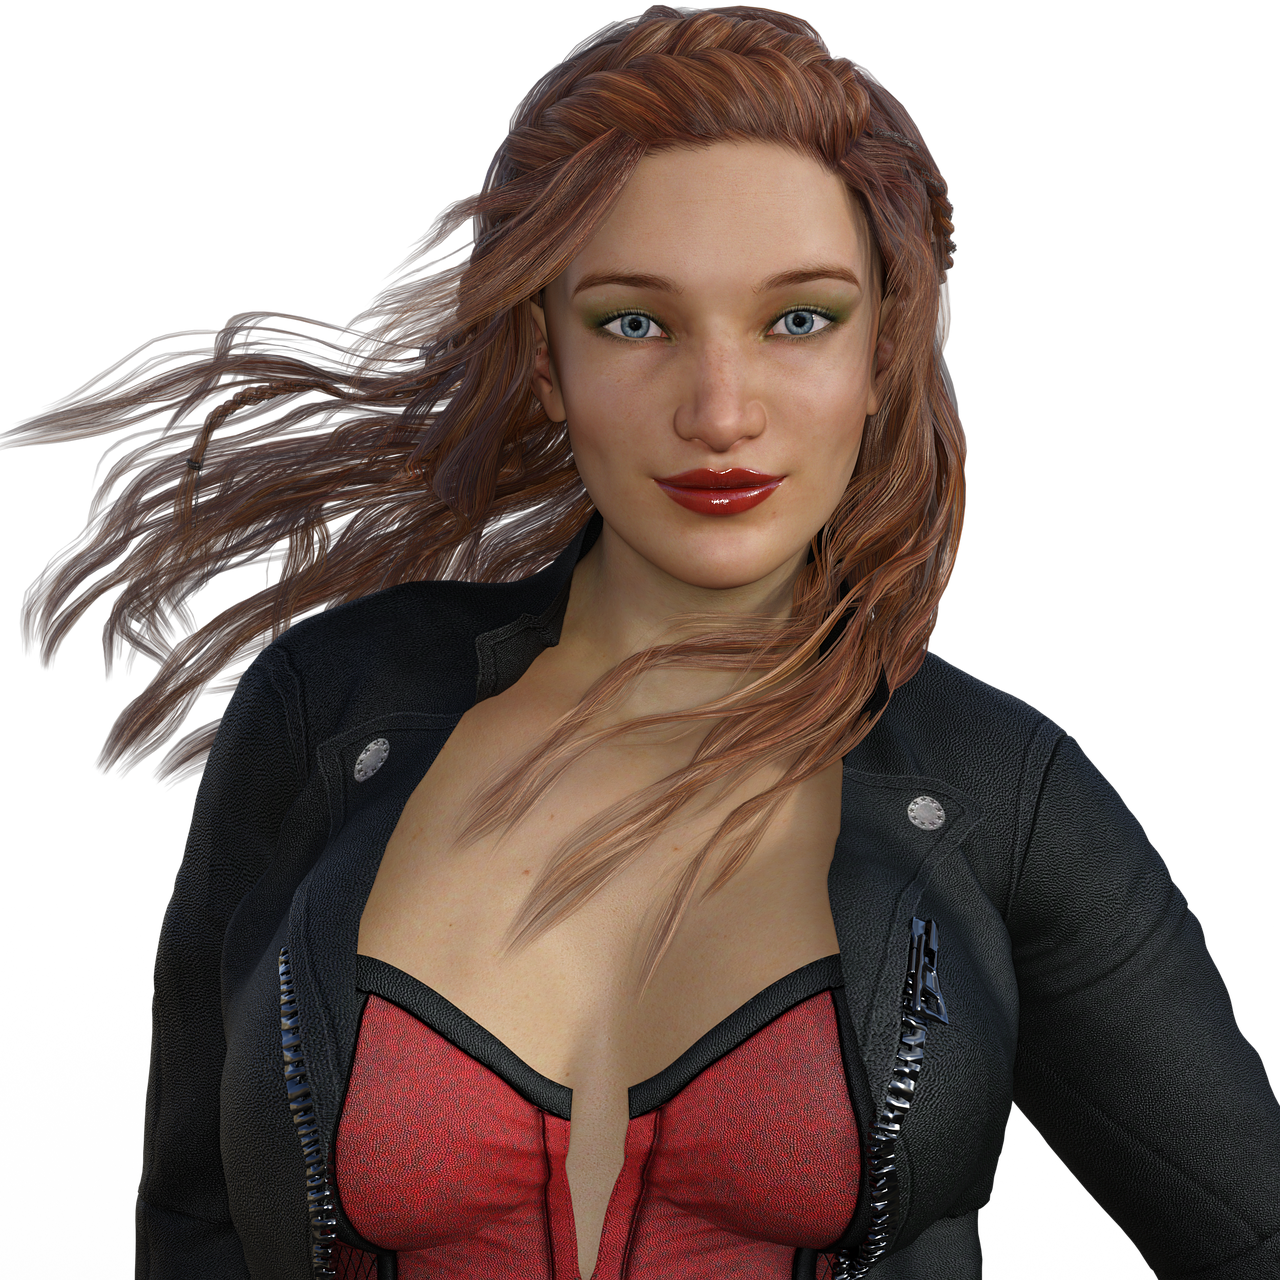 a woman in a red top and black jacket, zbrush central contest winner, dressed in biker leather, maiden with copper hair, 8k octae render photo, sexy face